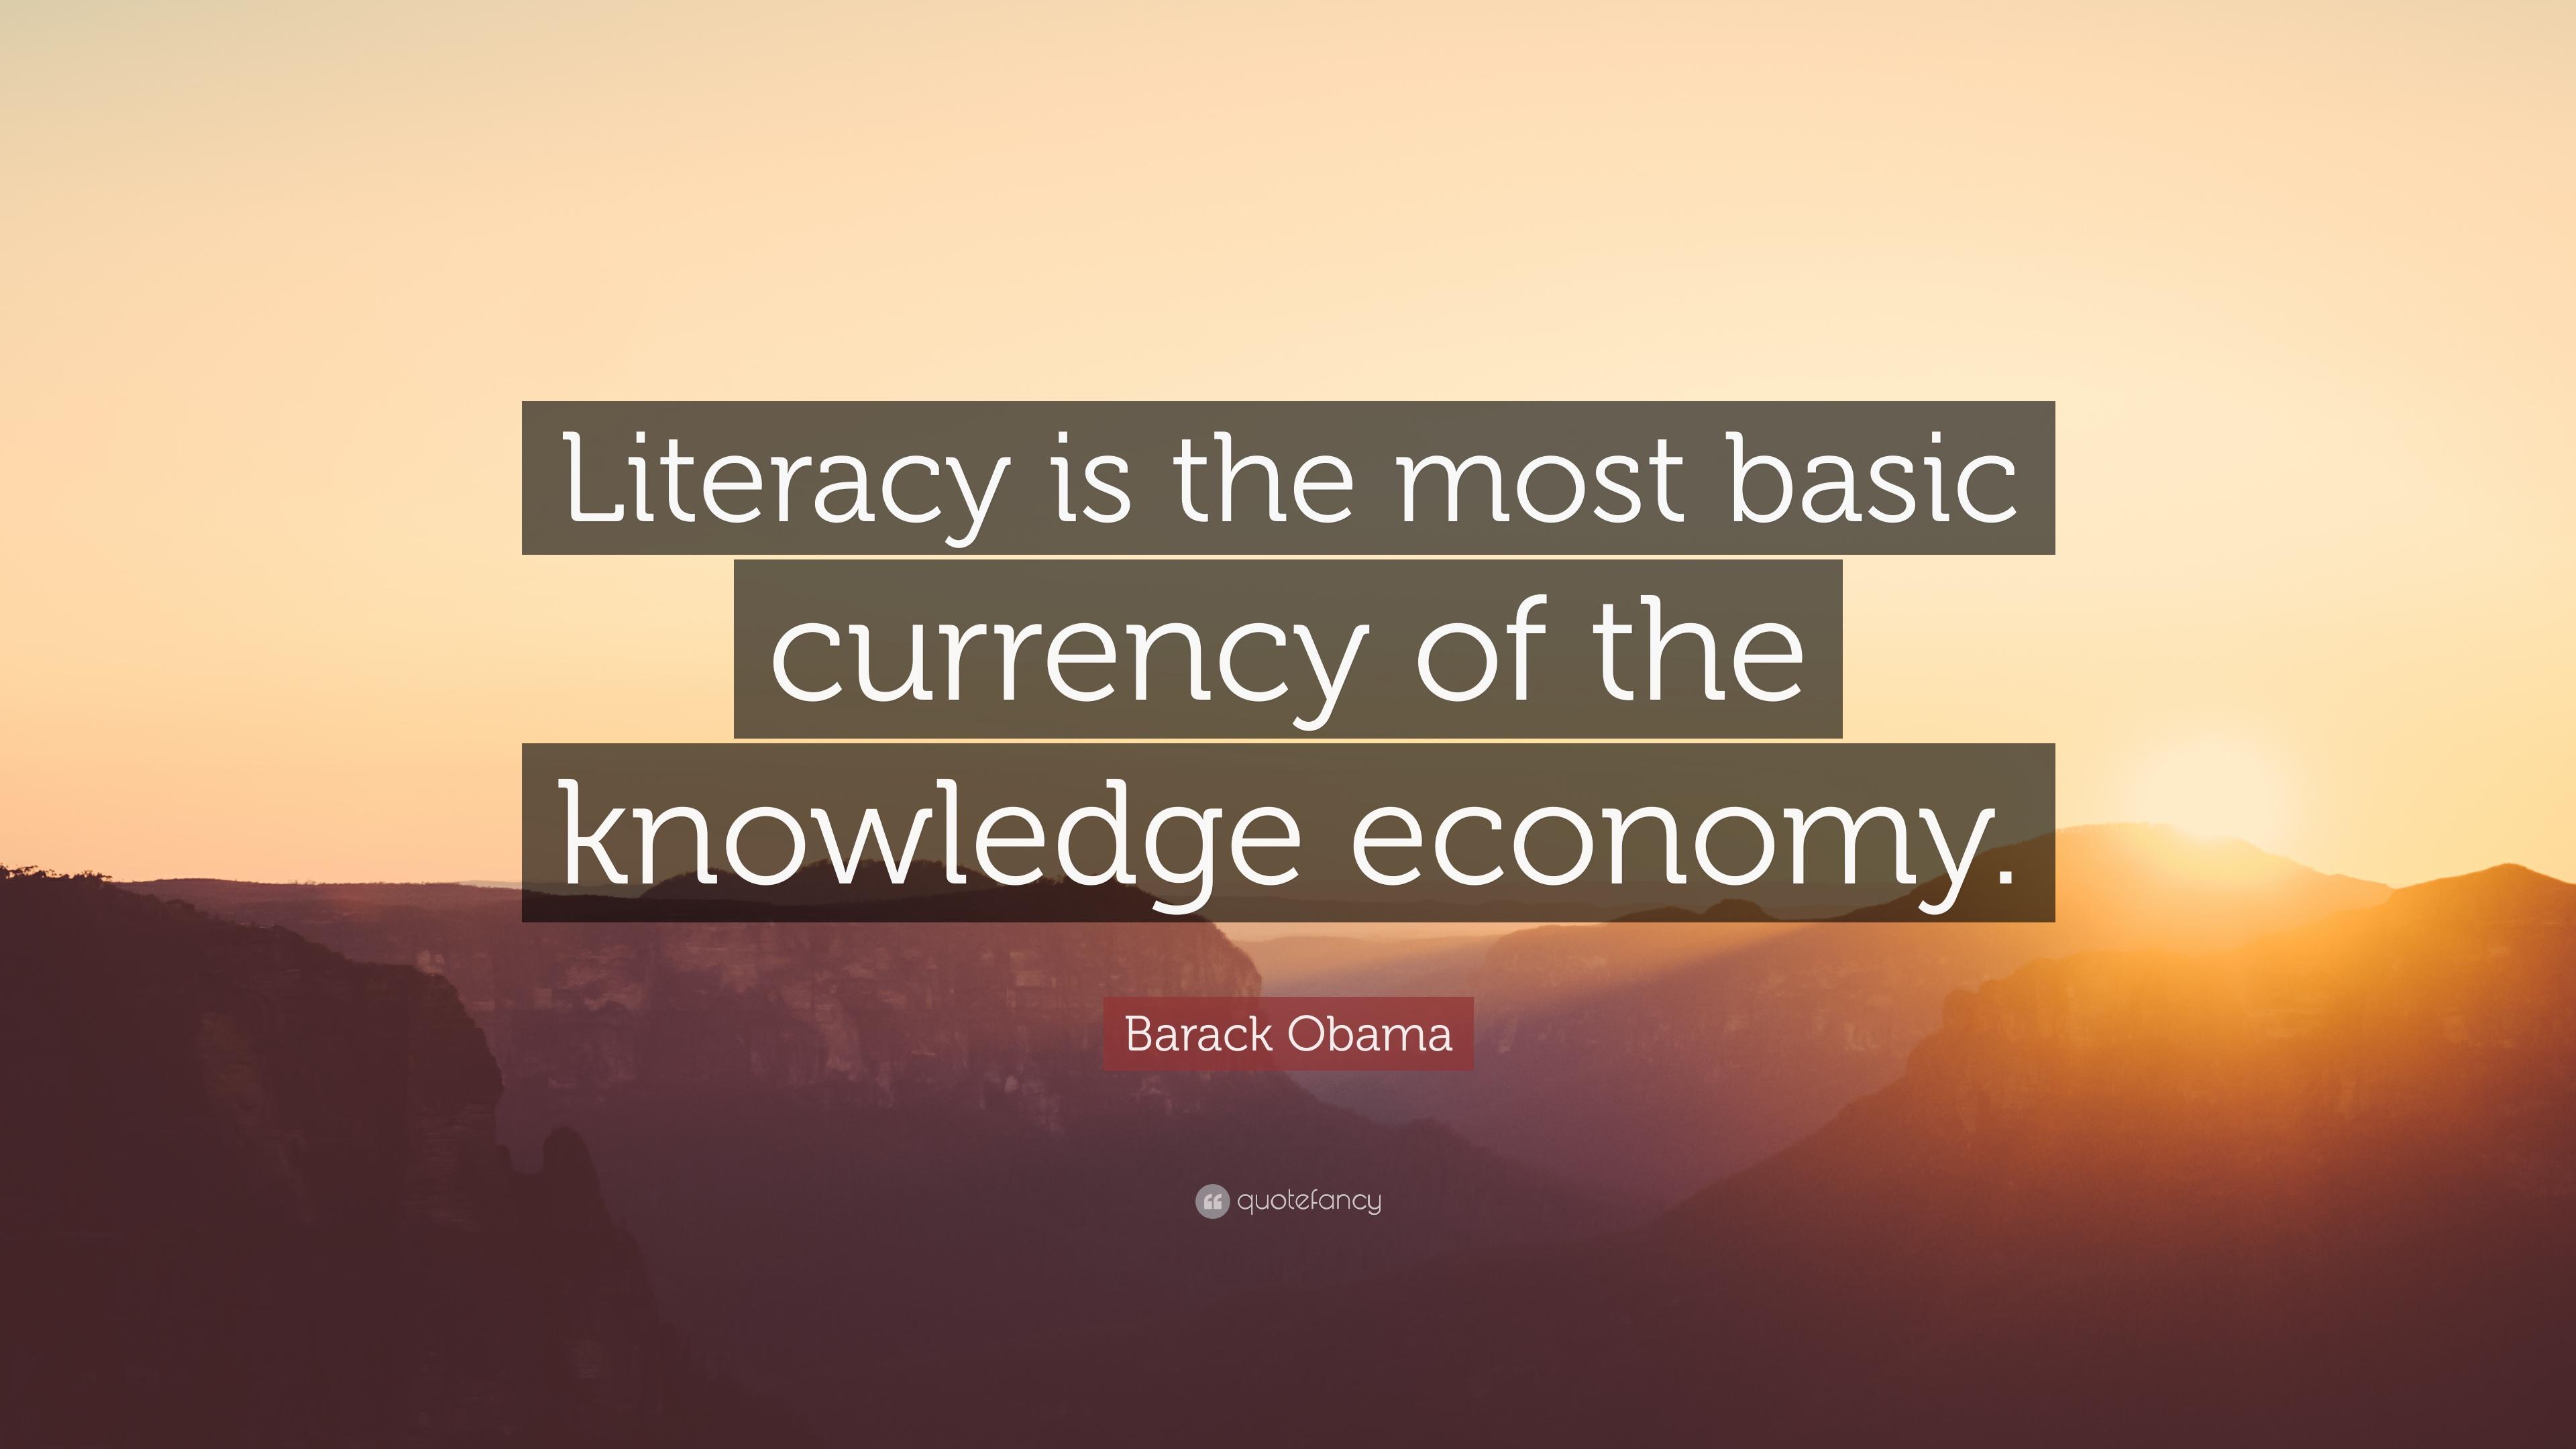 Barack Obama Quote: “Literacy is the most basic currency